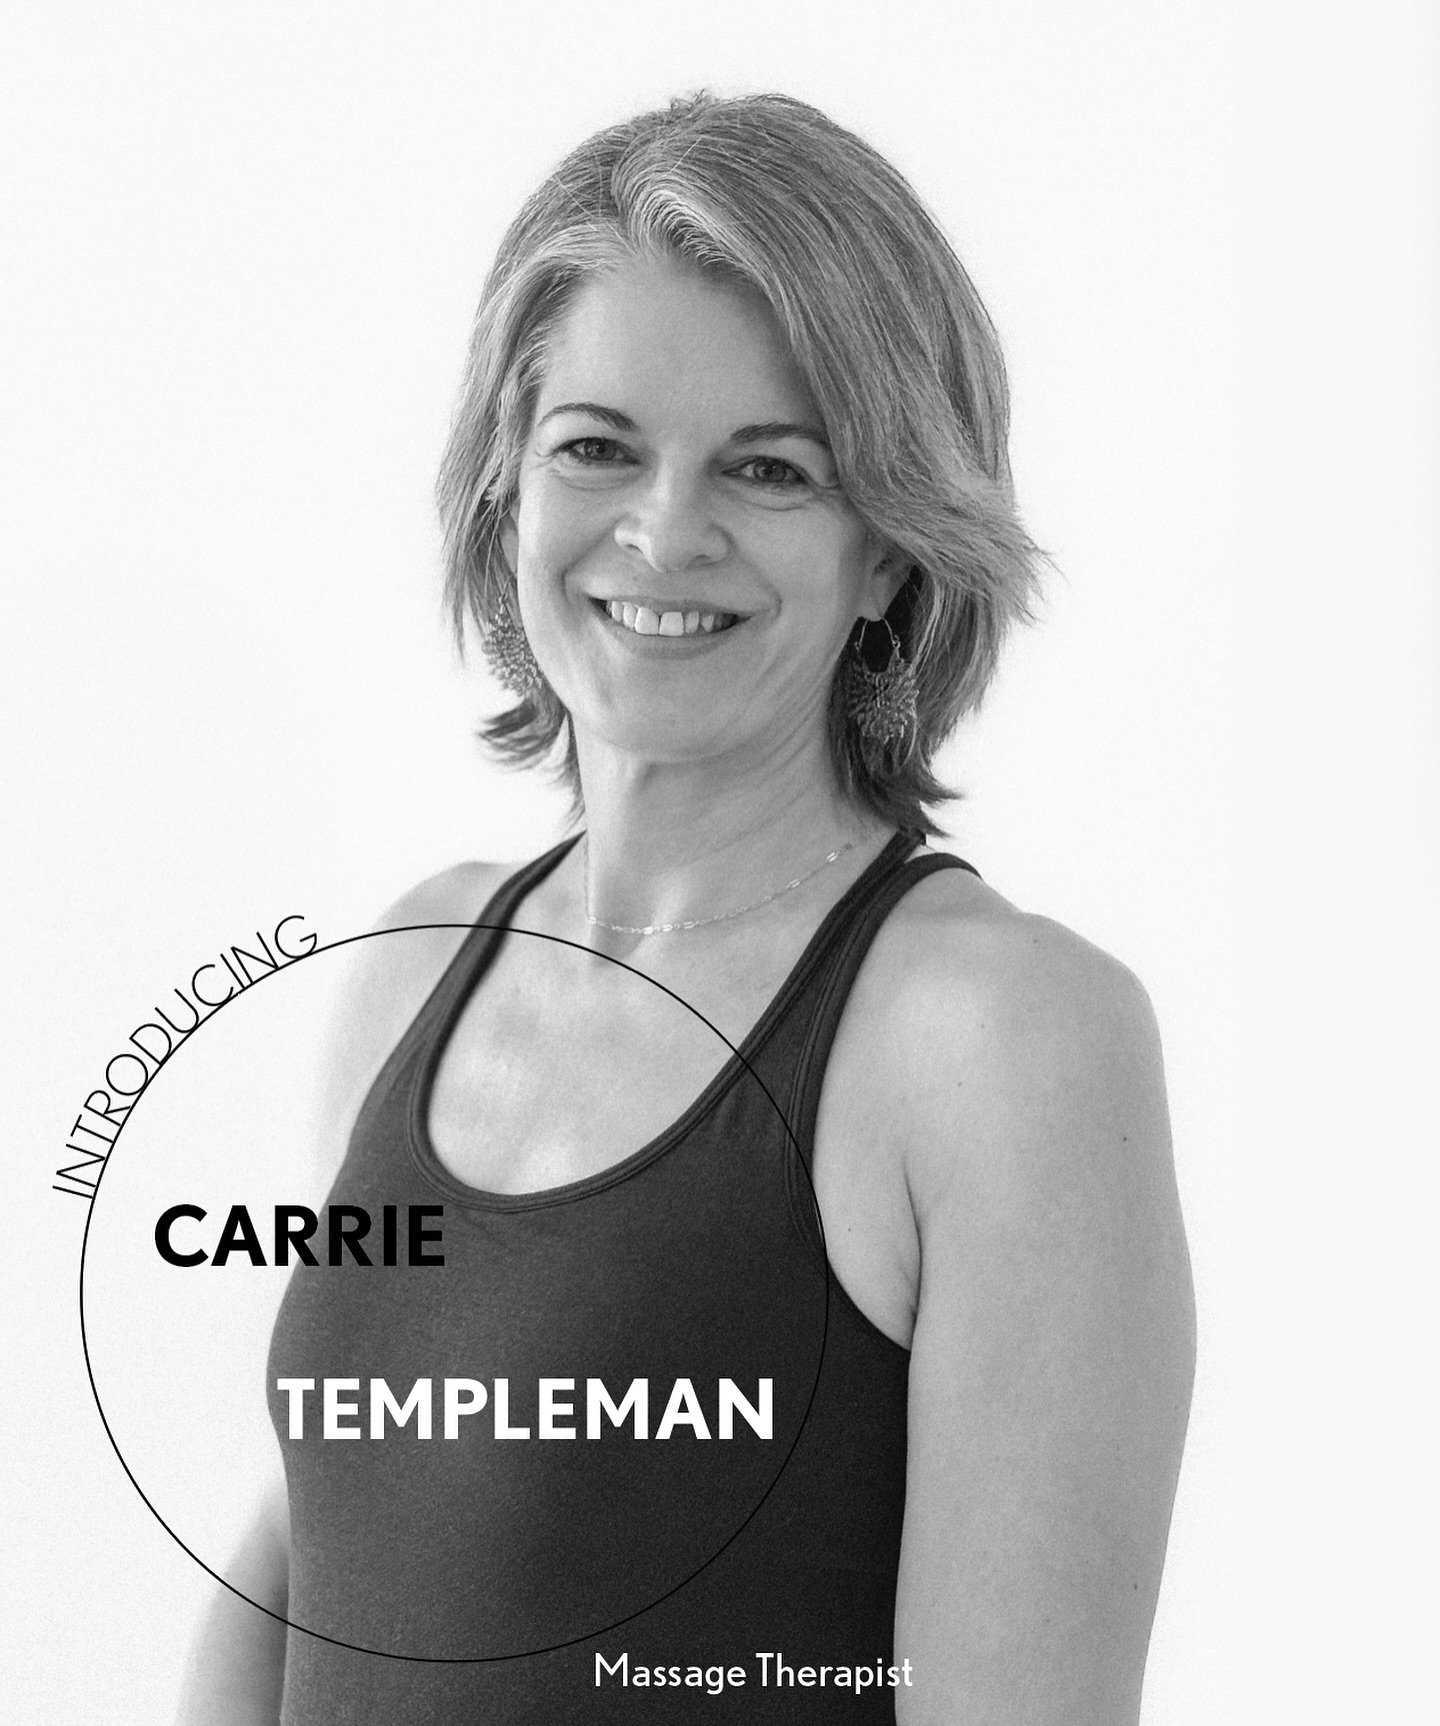 Curious about Lymphatic Massage? Carrie is the therapist for you! She is trained in the classic Vodder method for lymphatic drainage and is now offering lymphatic sessions every Monday at TAOU! 

Carrie&rsquo;s sessions are warm, soothing and customi